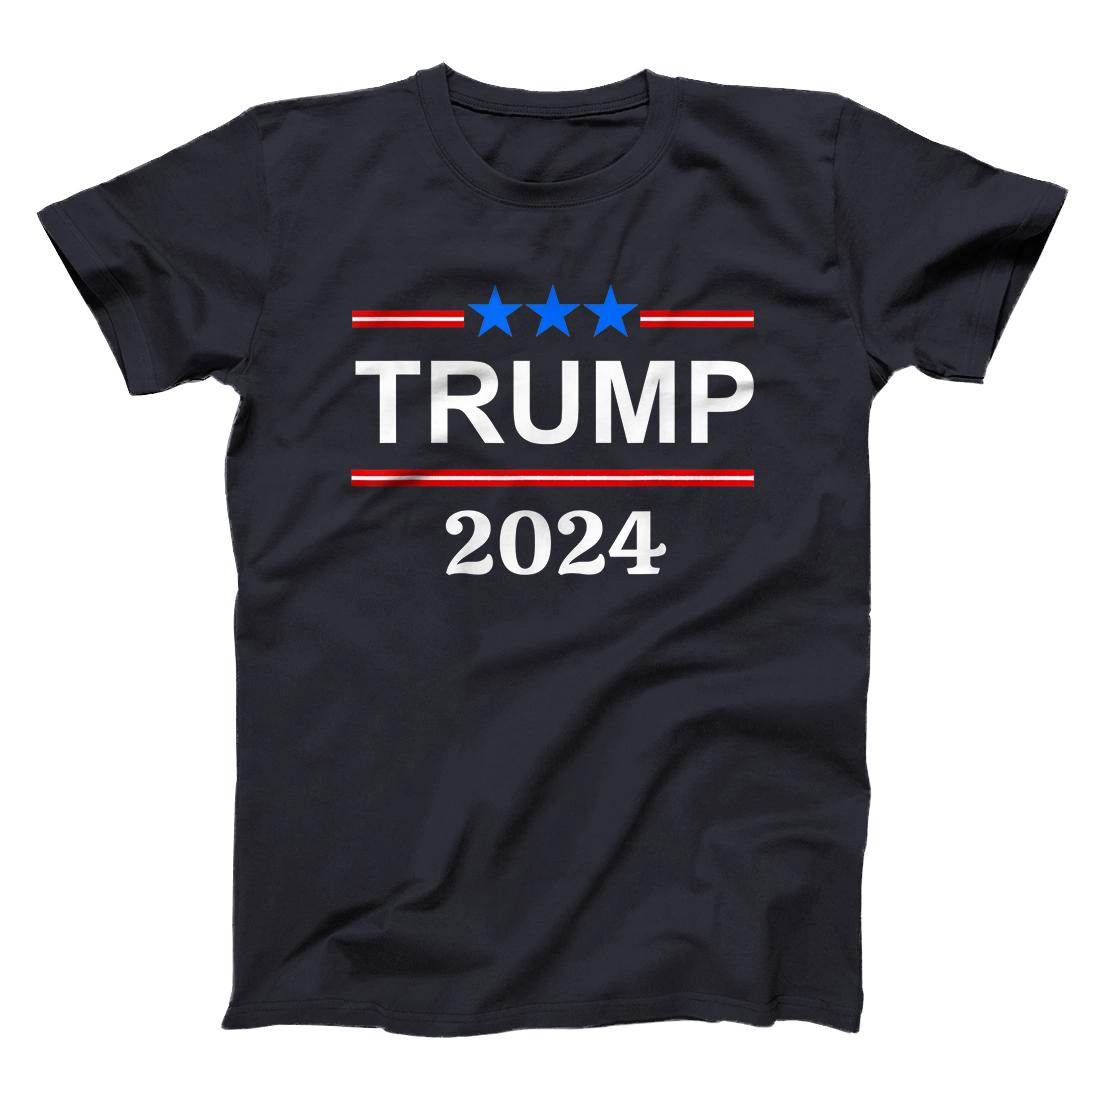 Personalized TRUMP 2024 ELECTION T-Shirt - All Star Shirt